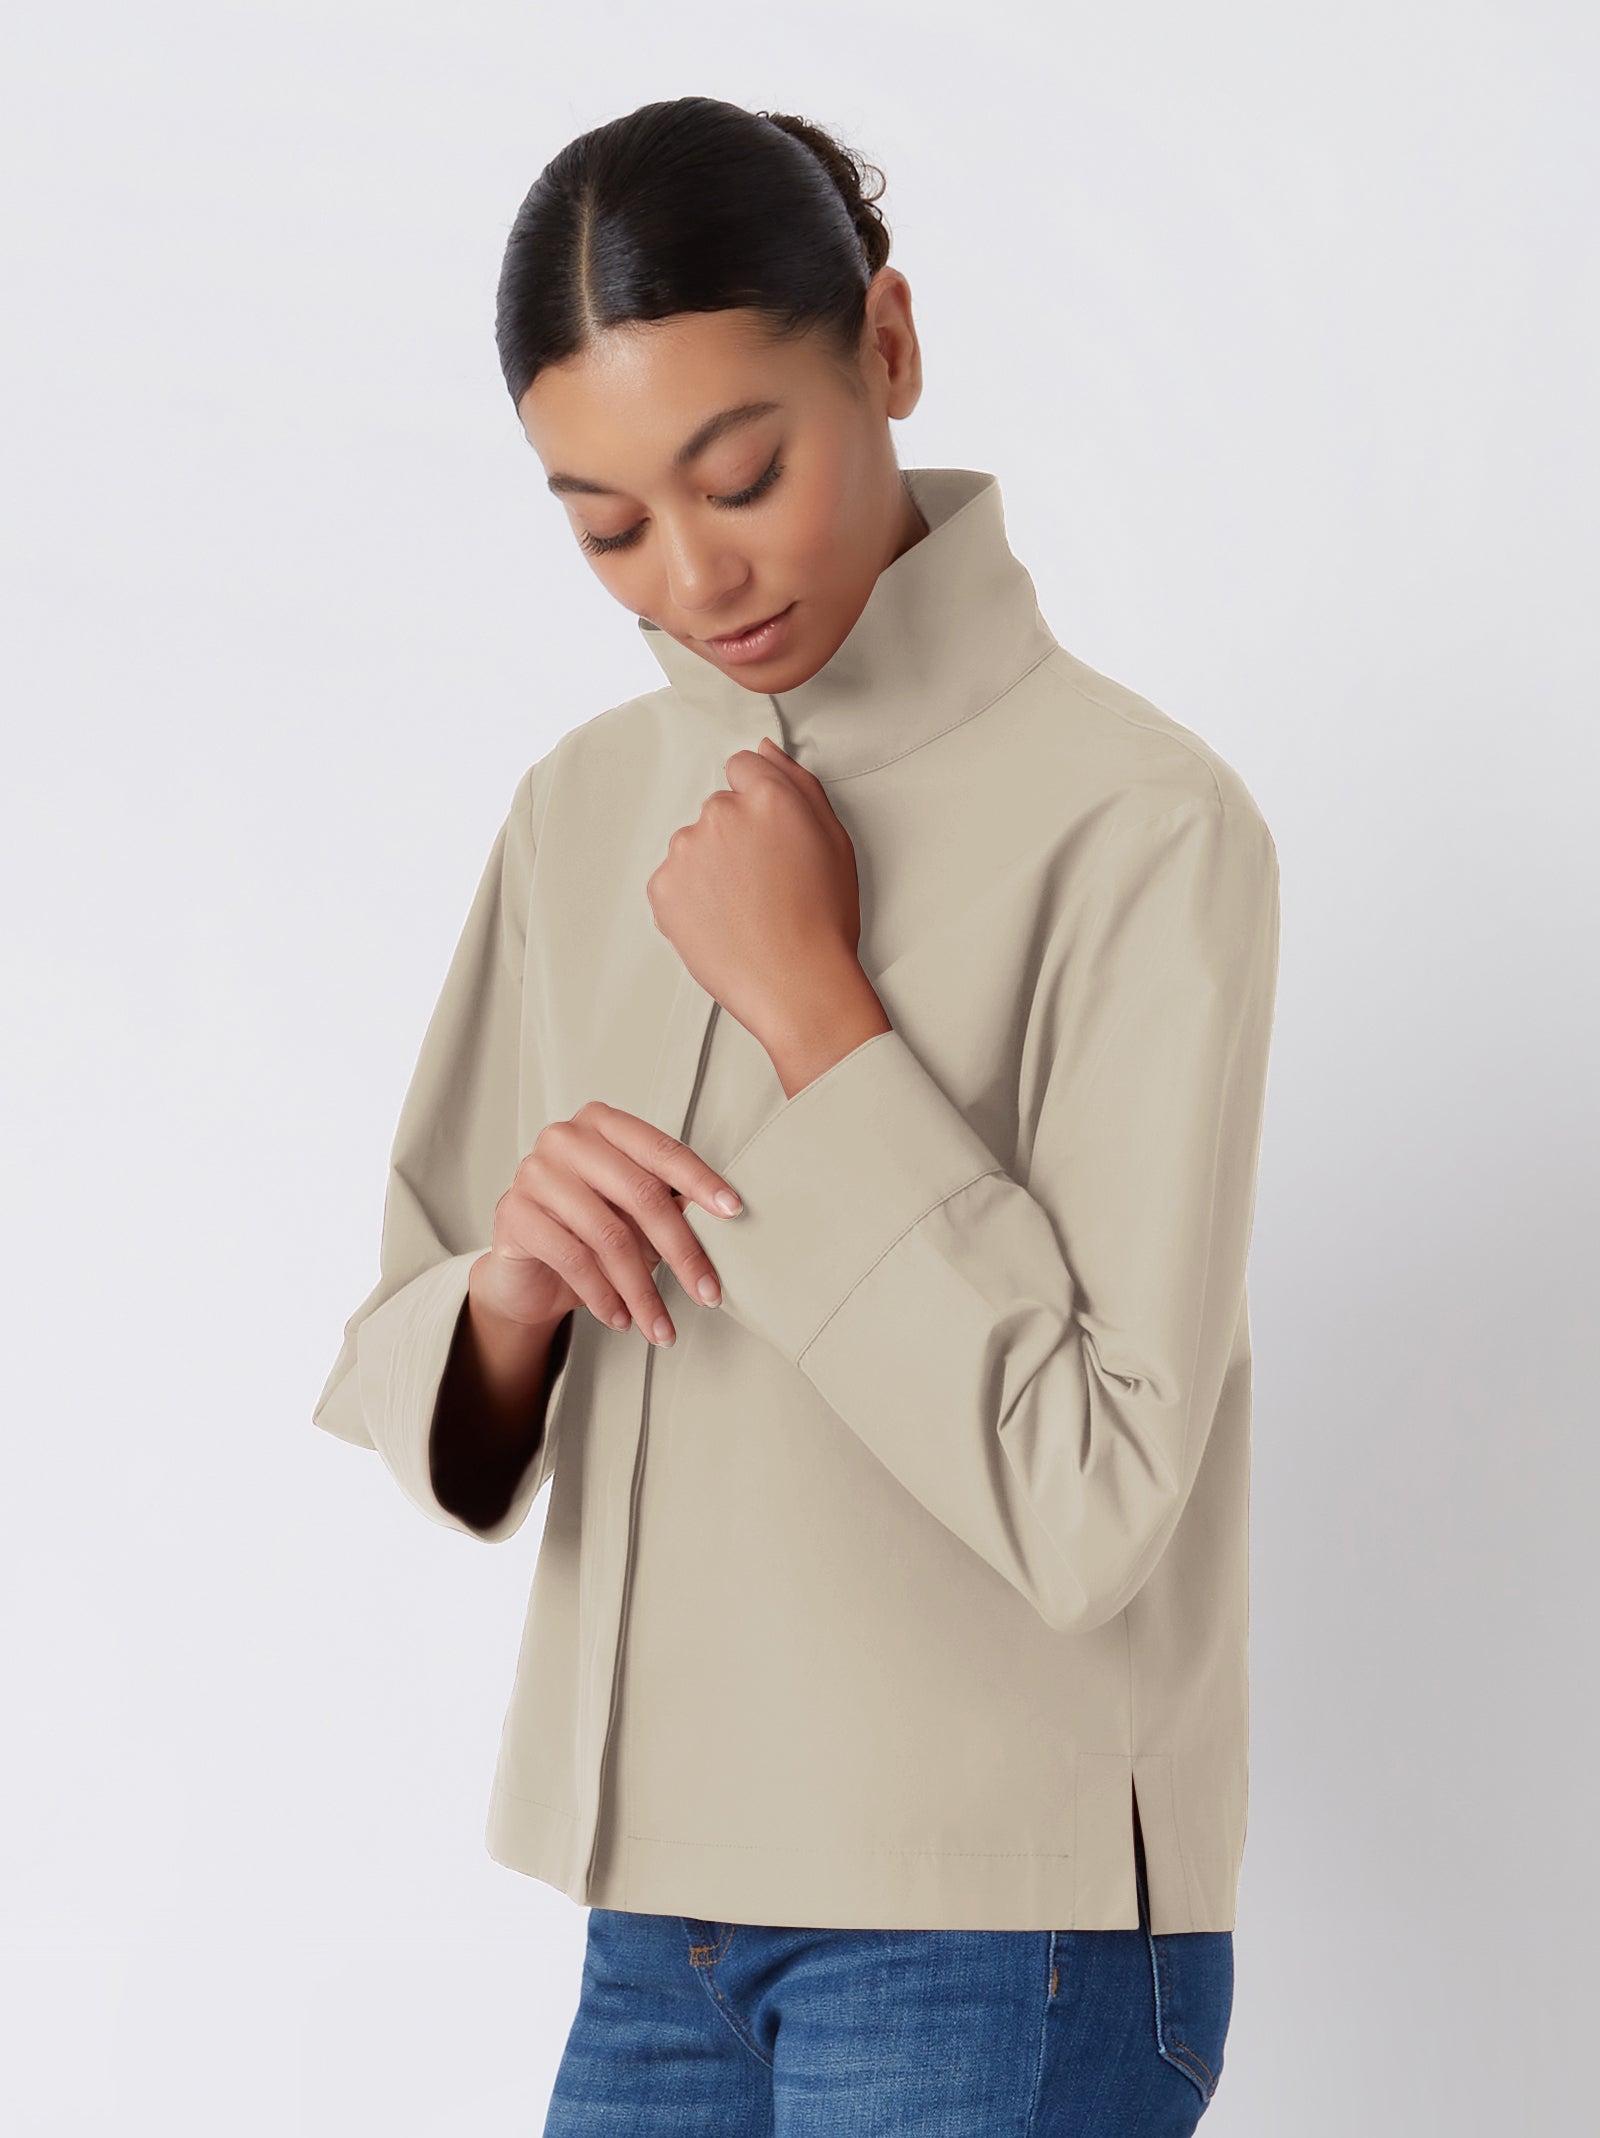 Kal Rieman Peggy Collared Shirt in Classic Khaki Broadcloth on Model Looking Down Cropped Front View